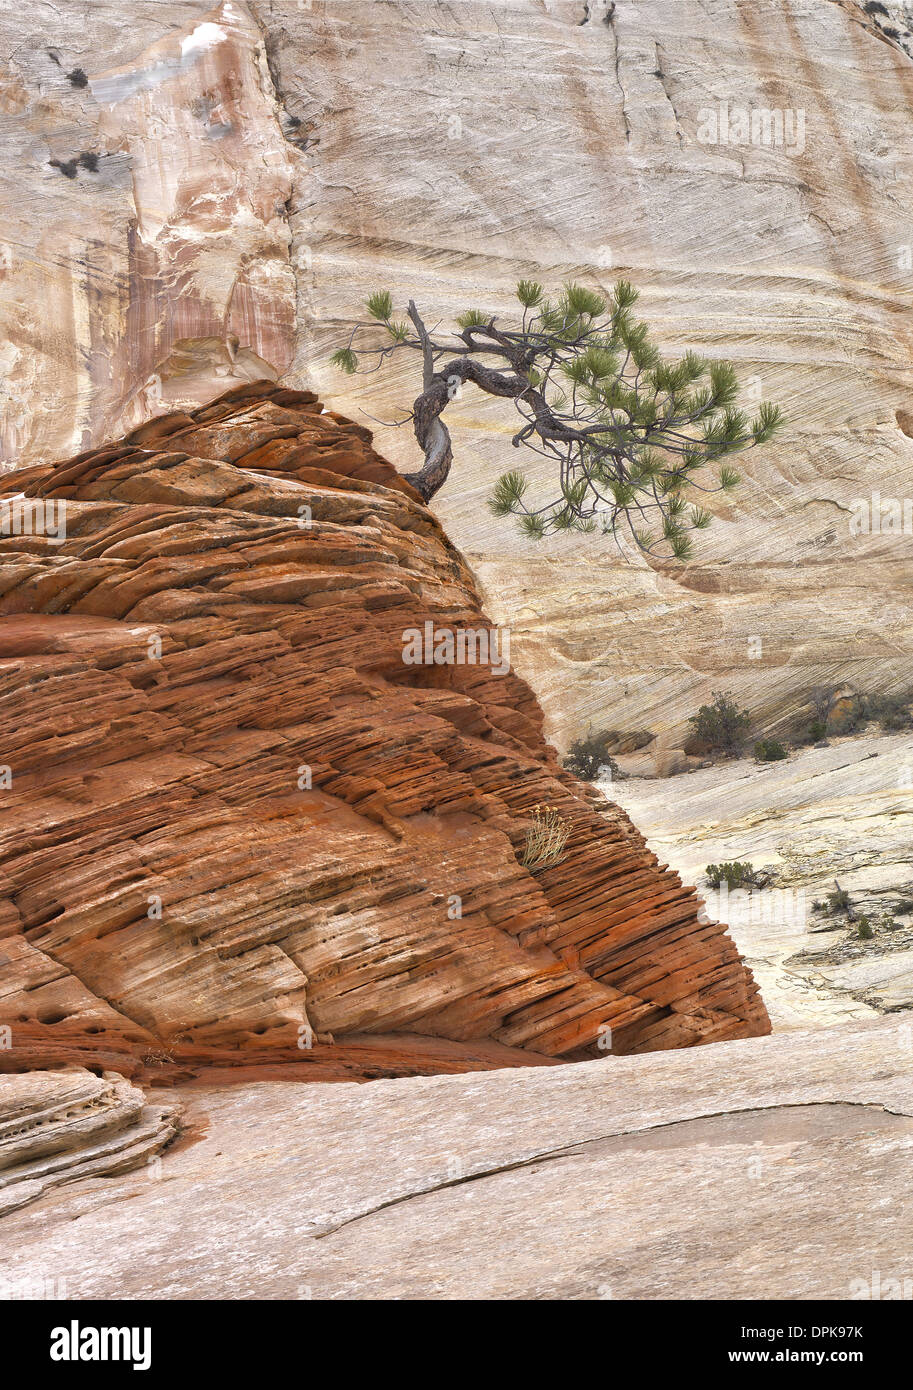 Pinion Pine Tree growing from the top of a sandstone formation, Zion National Park, Utah USA Stock Photo